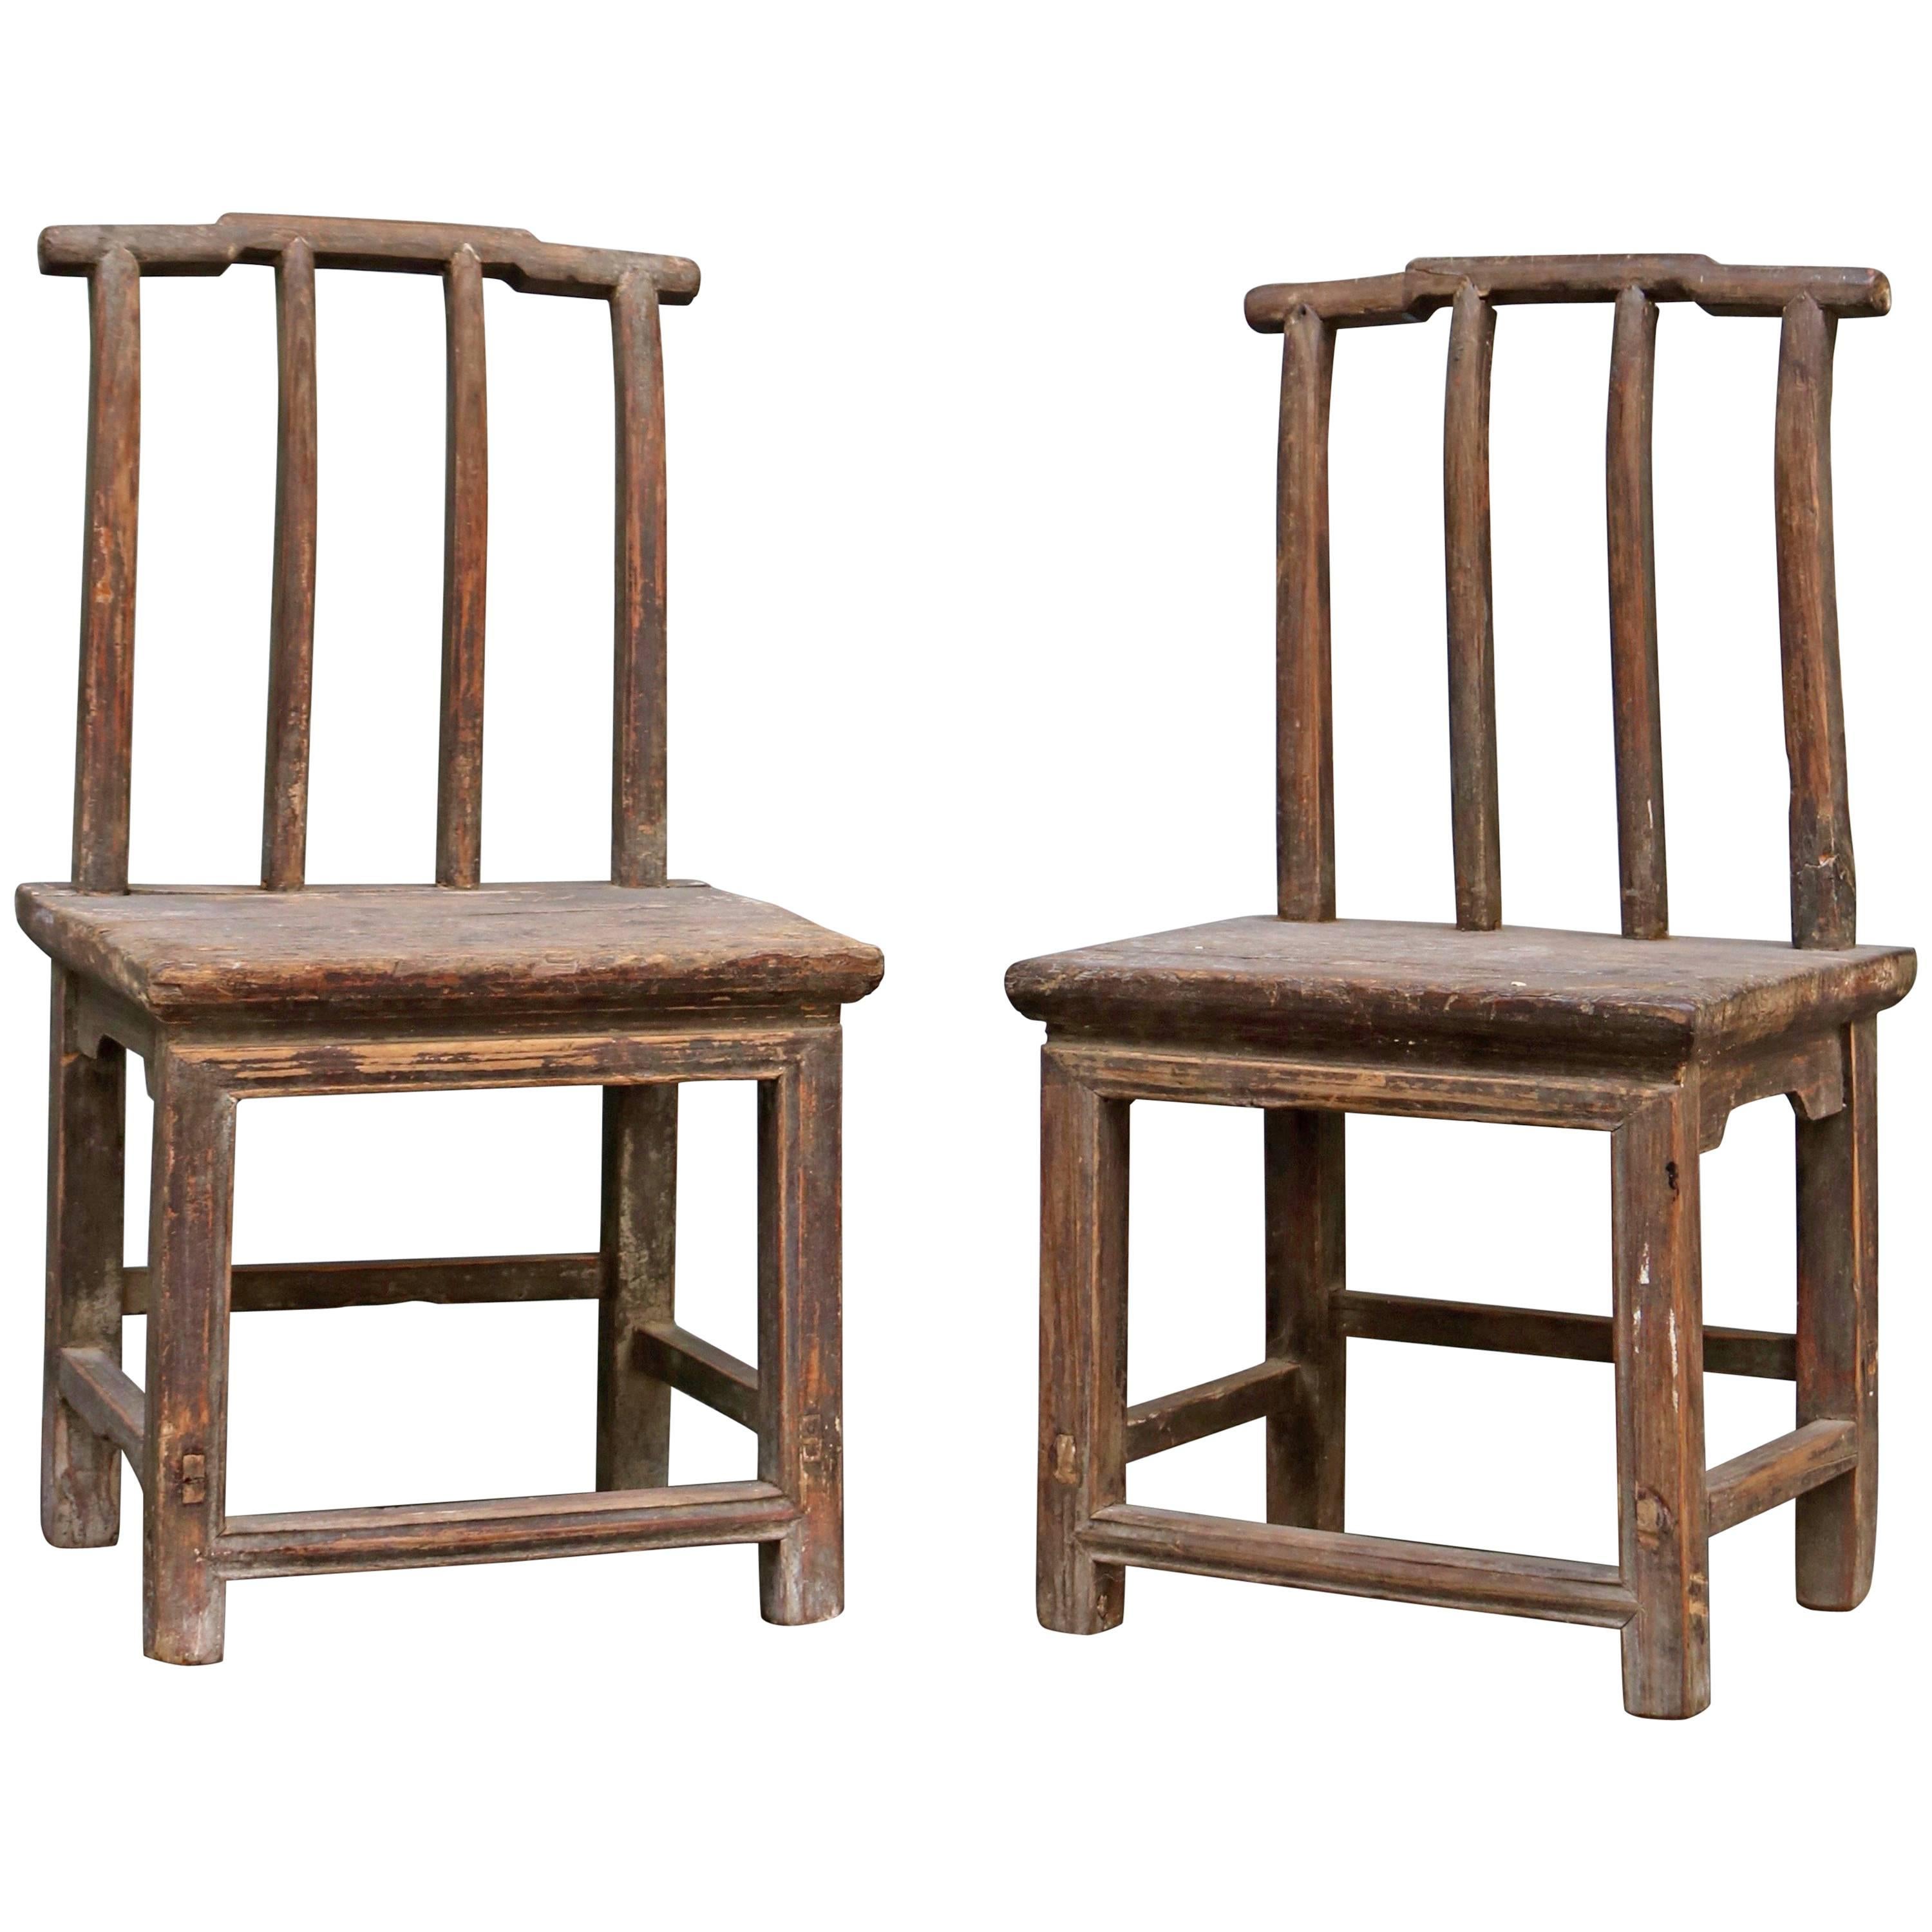 Pair of Children Chairs Made in Old Chinese Elm Wood